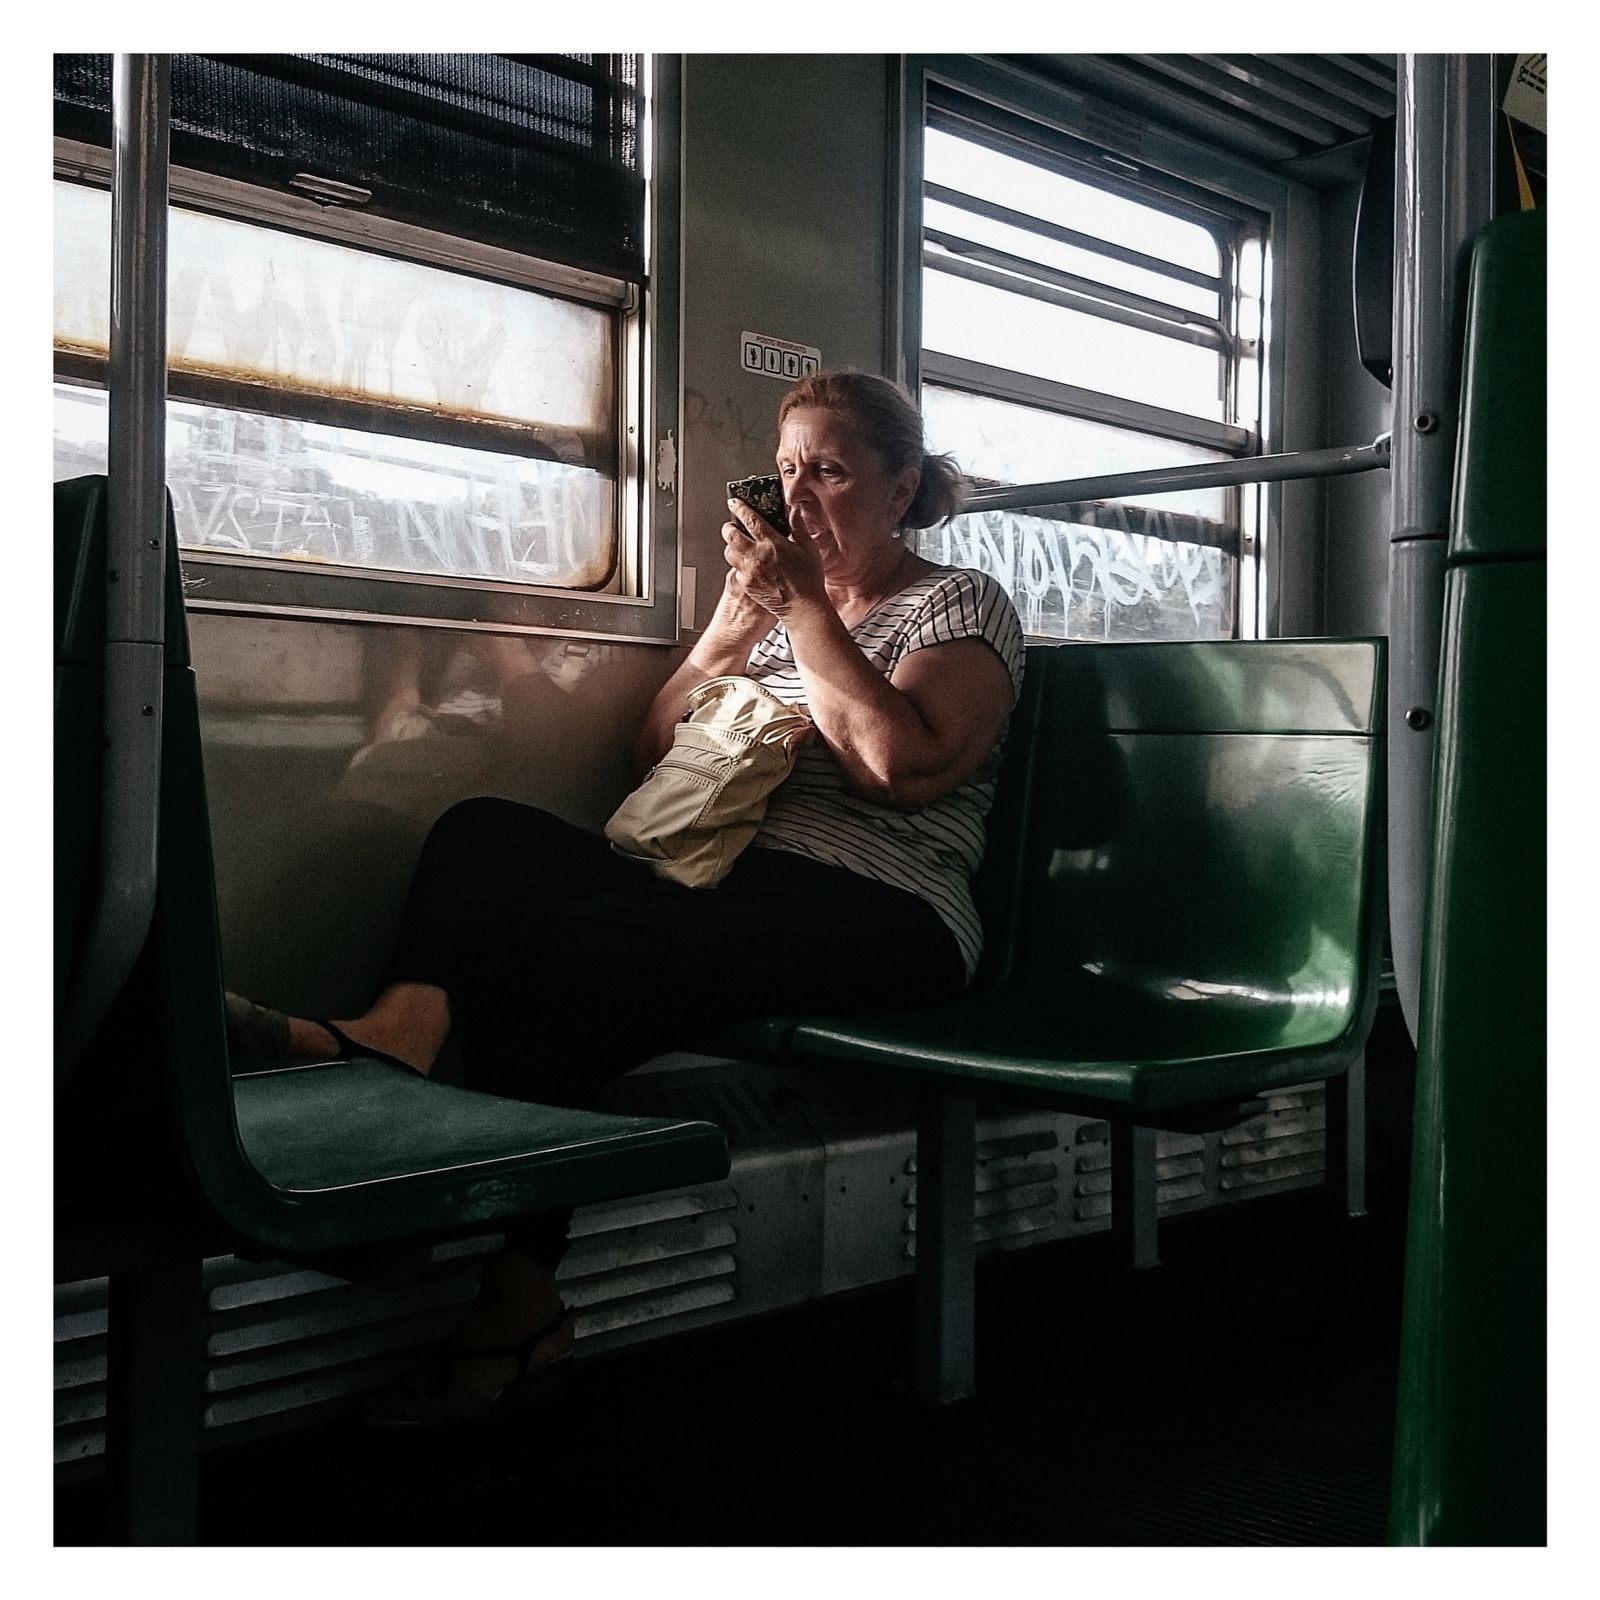 © Lorenzo Papi - Image from the The train to North Rome photography project